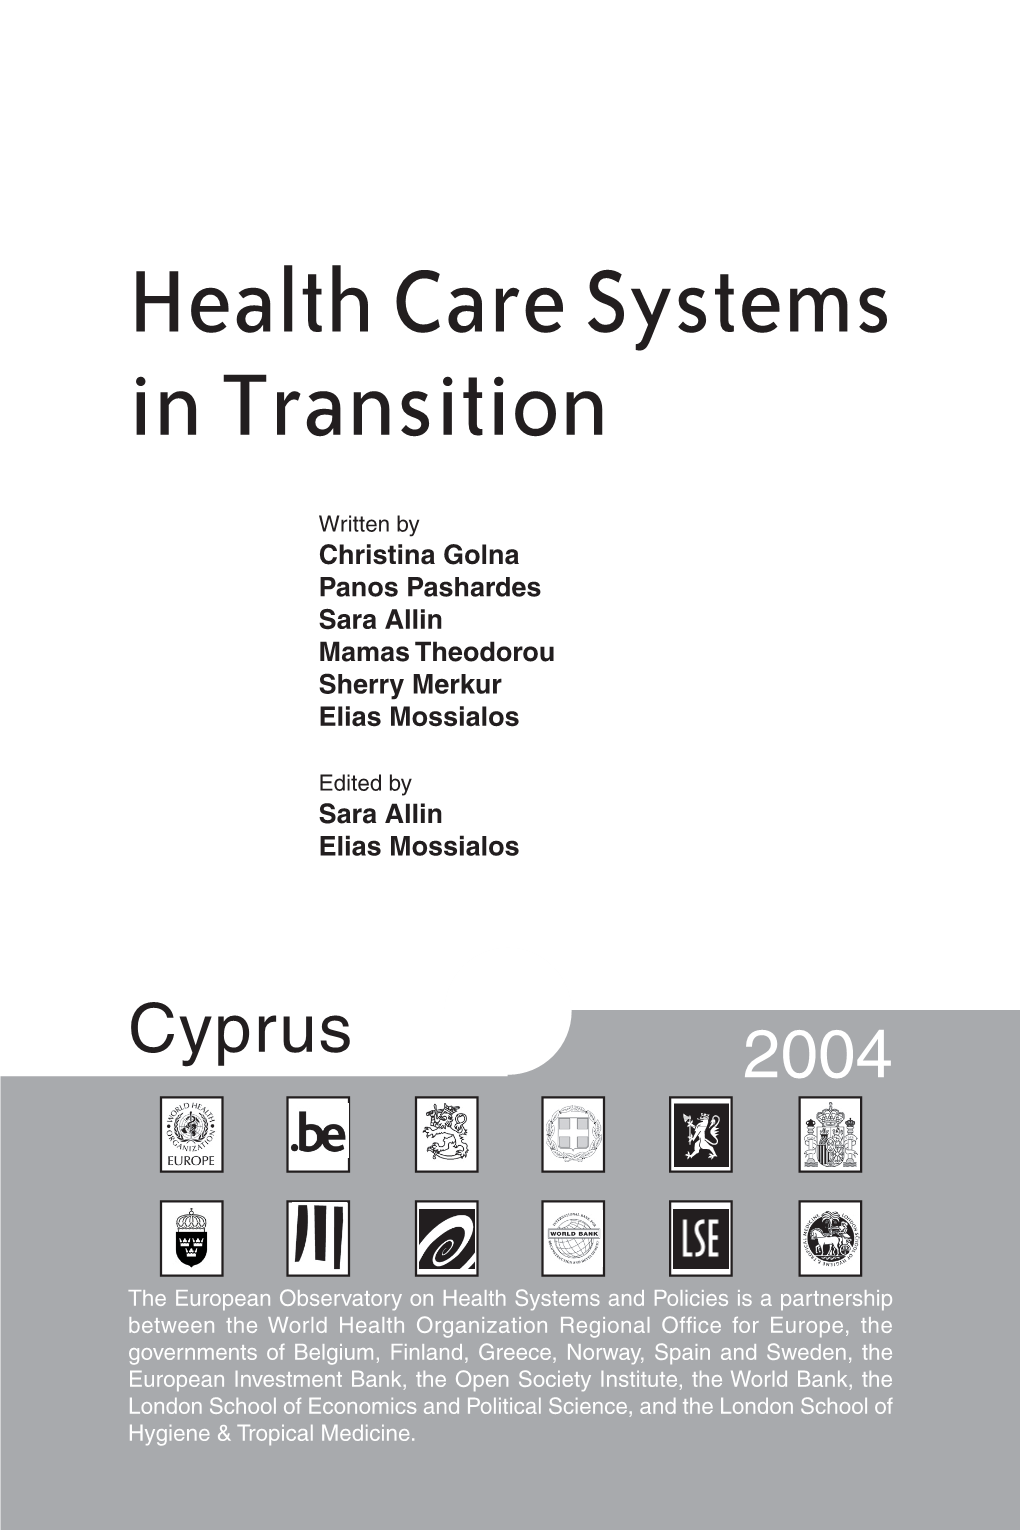 Health Care Systems in Transition: Cyprus